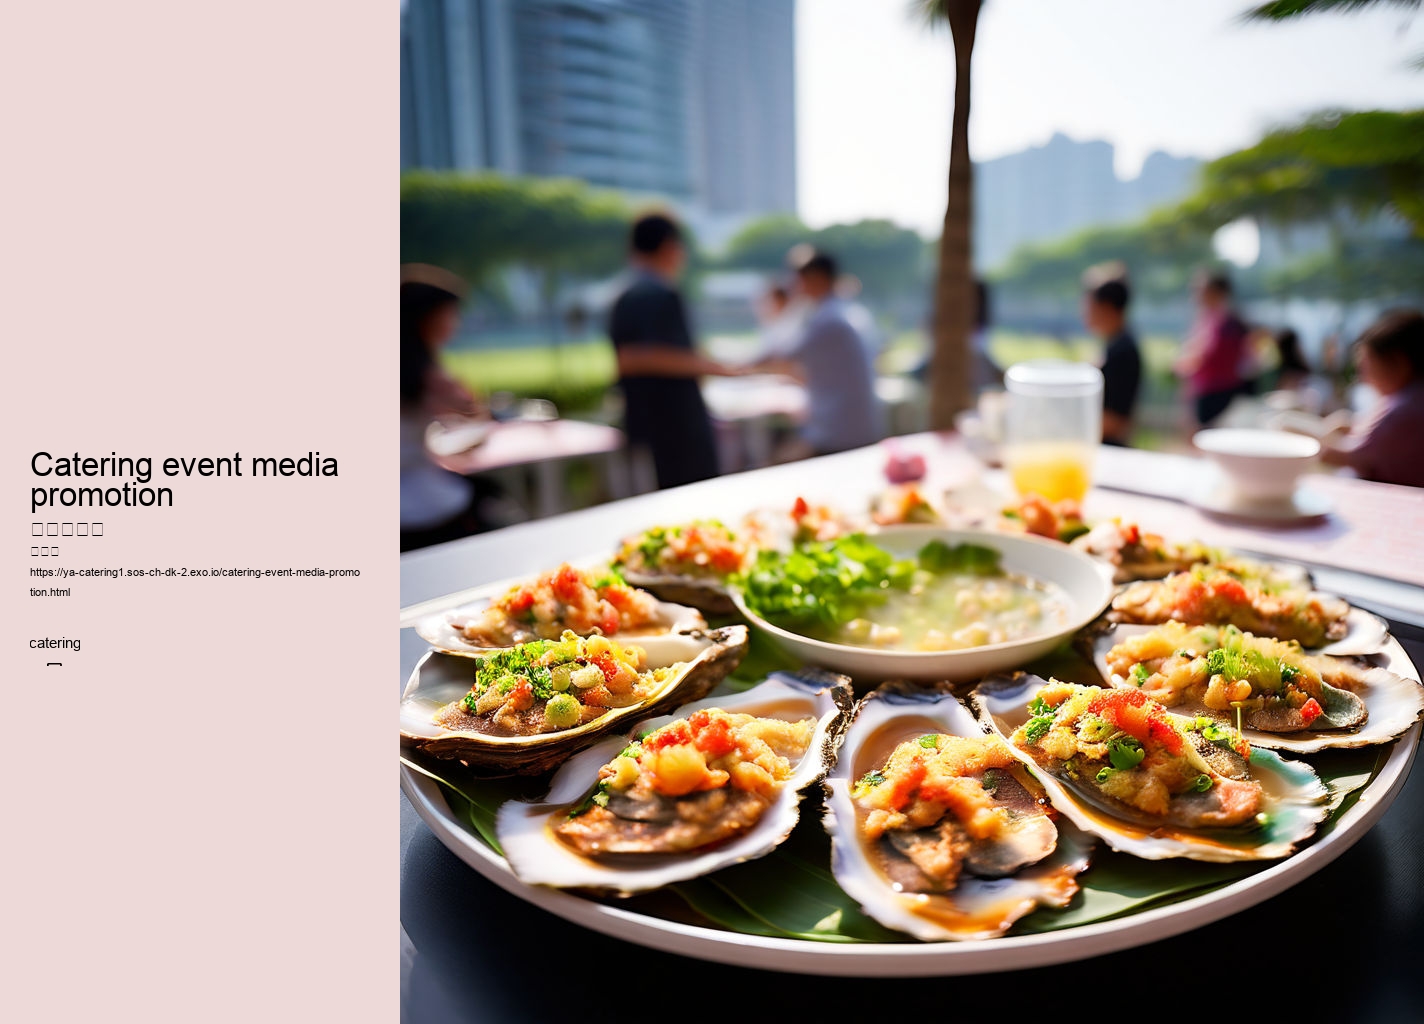 Catering event media promotion